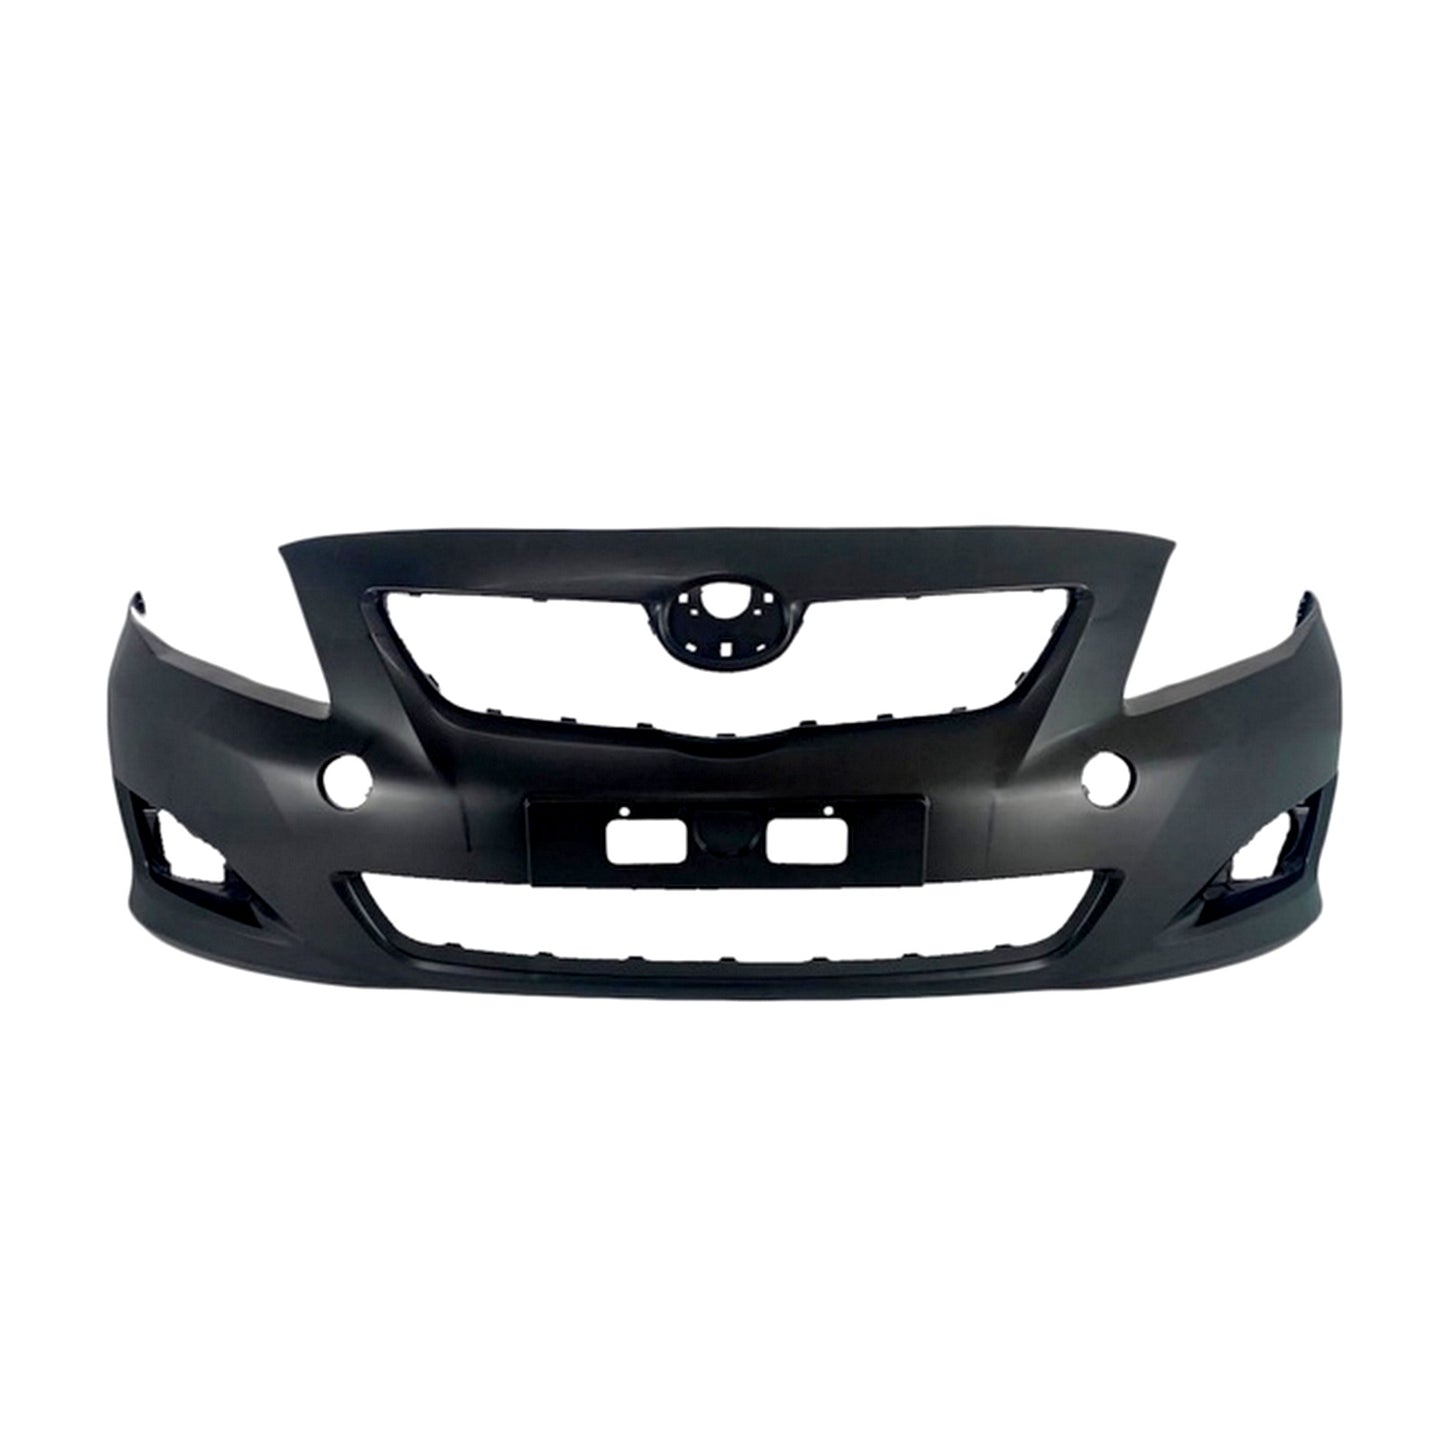 BUMPER FRONT FOR TOYOTA COROLLA (2008-2010)